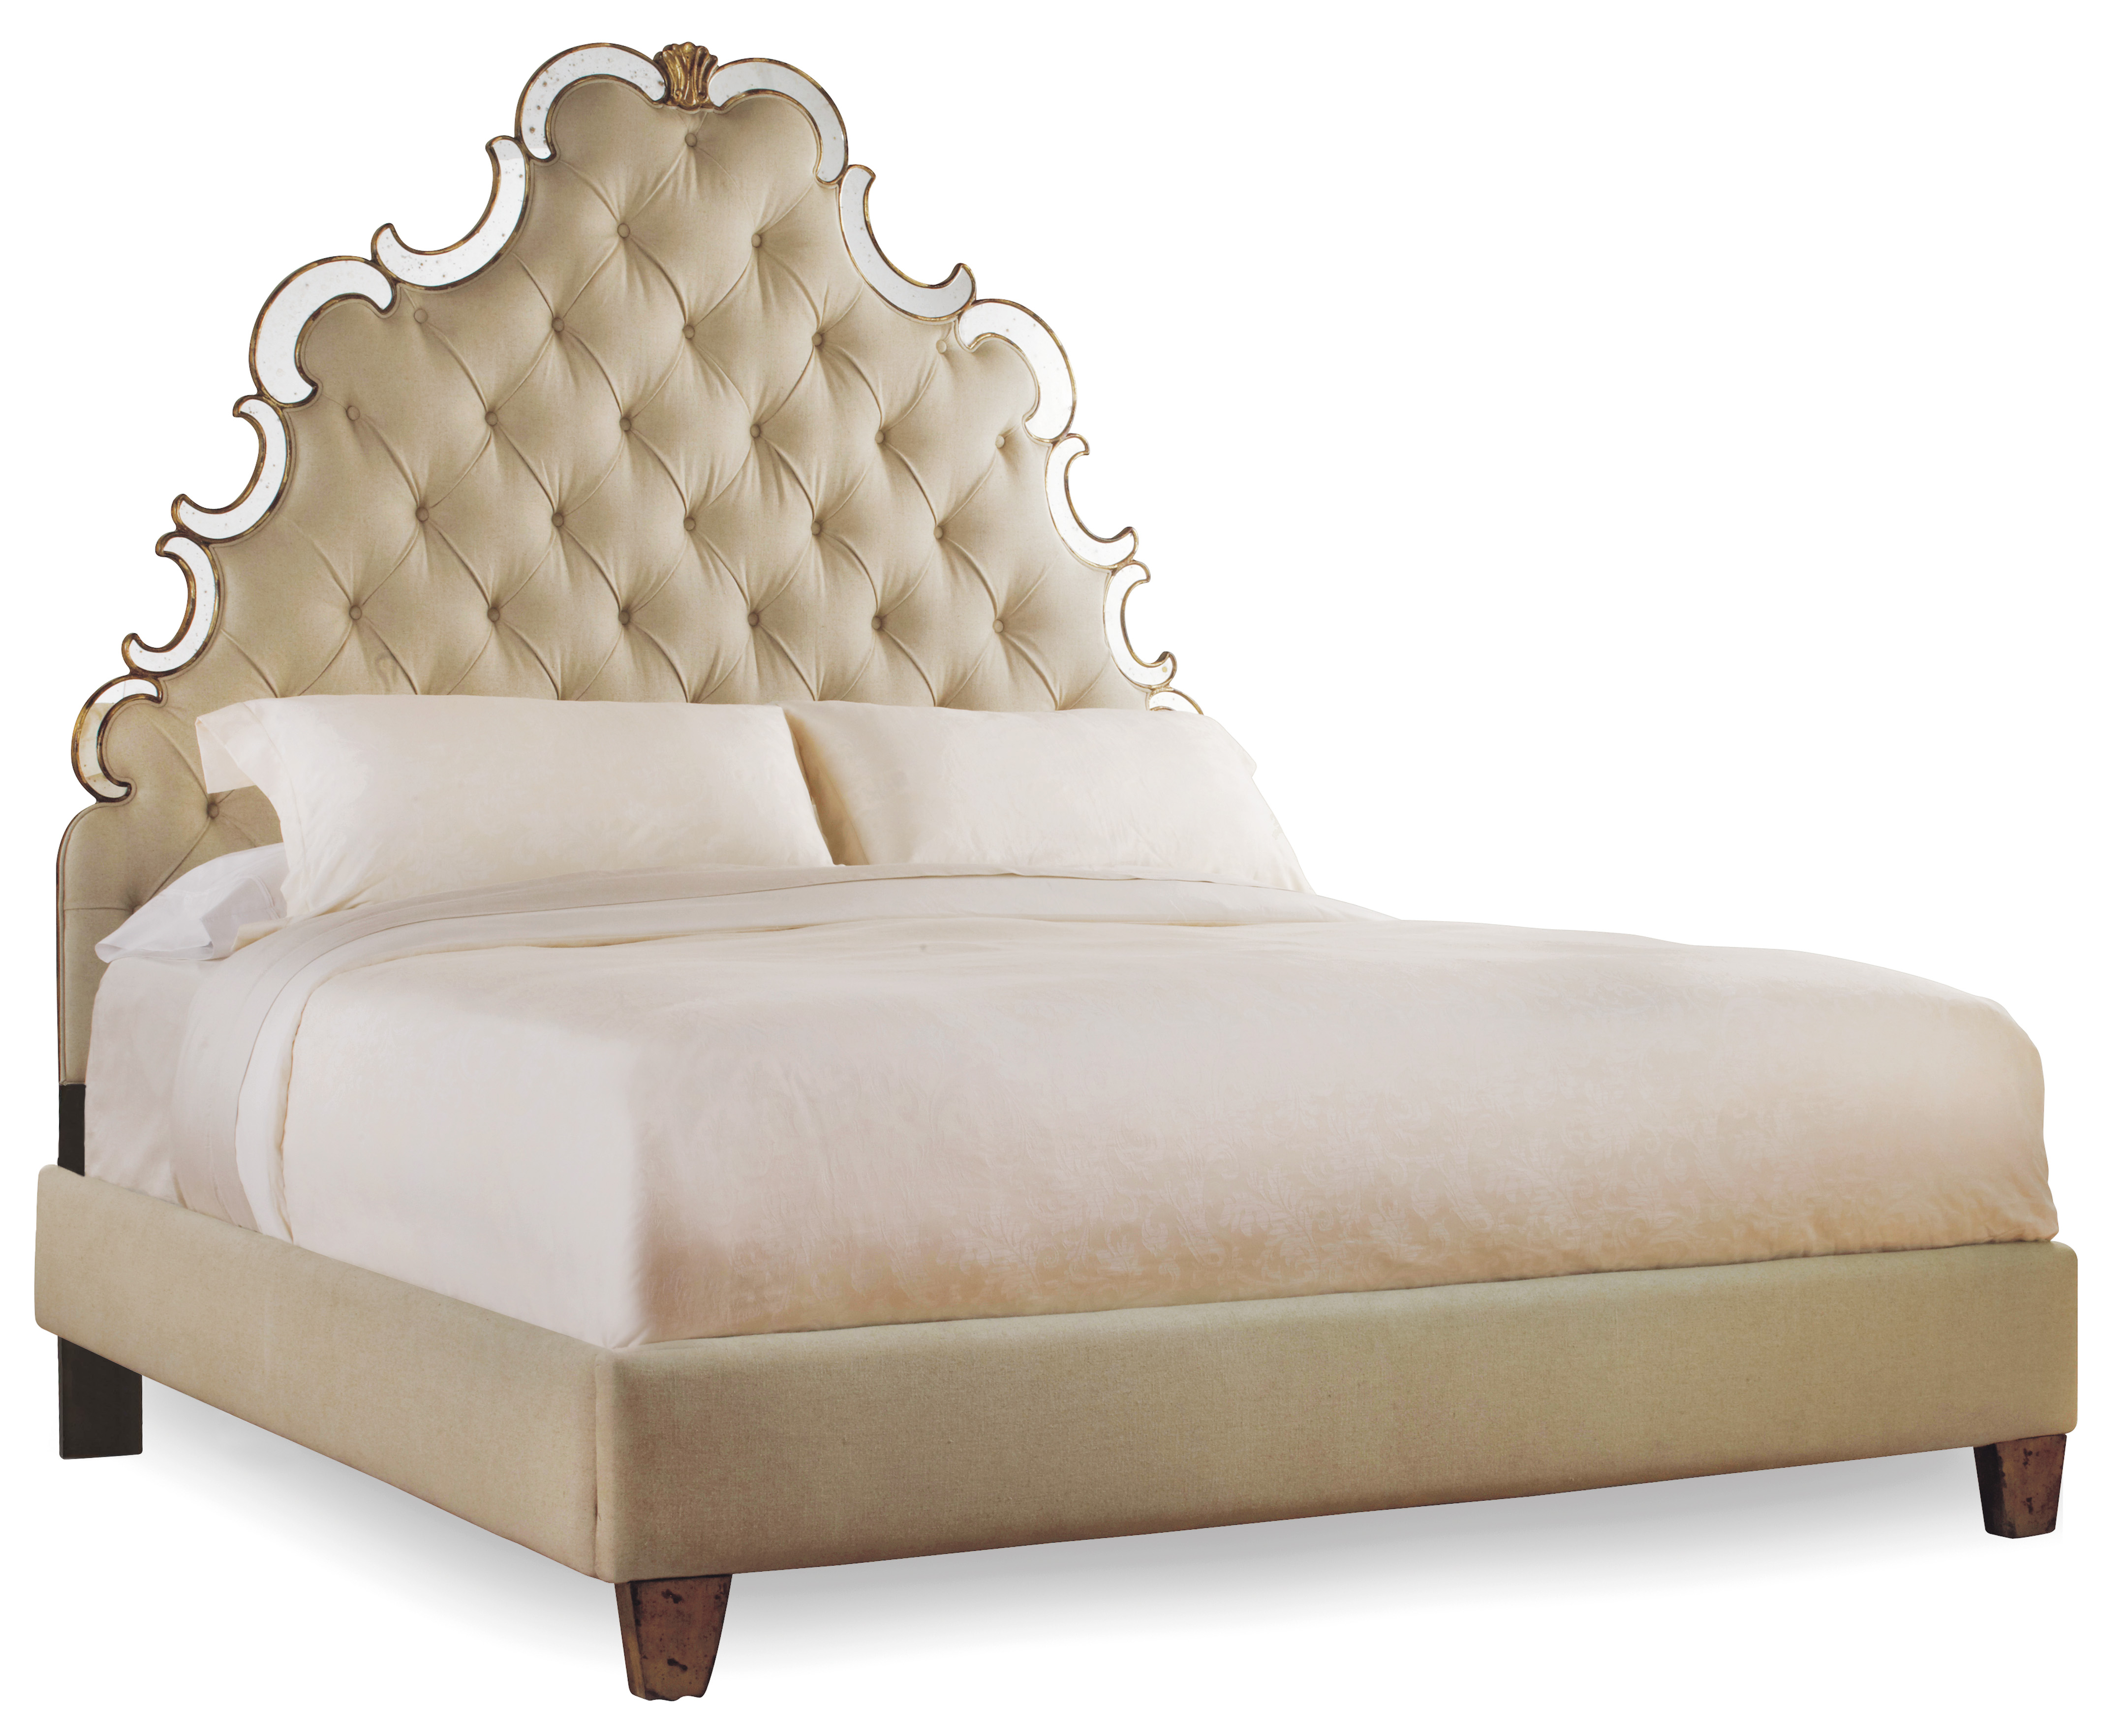 Picture of Tufted Bed Bling